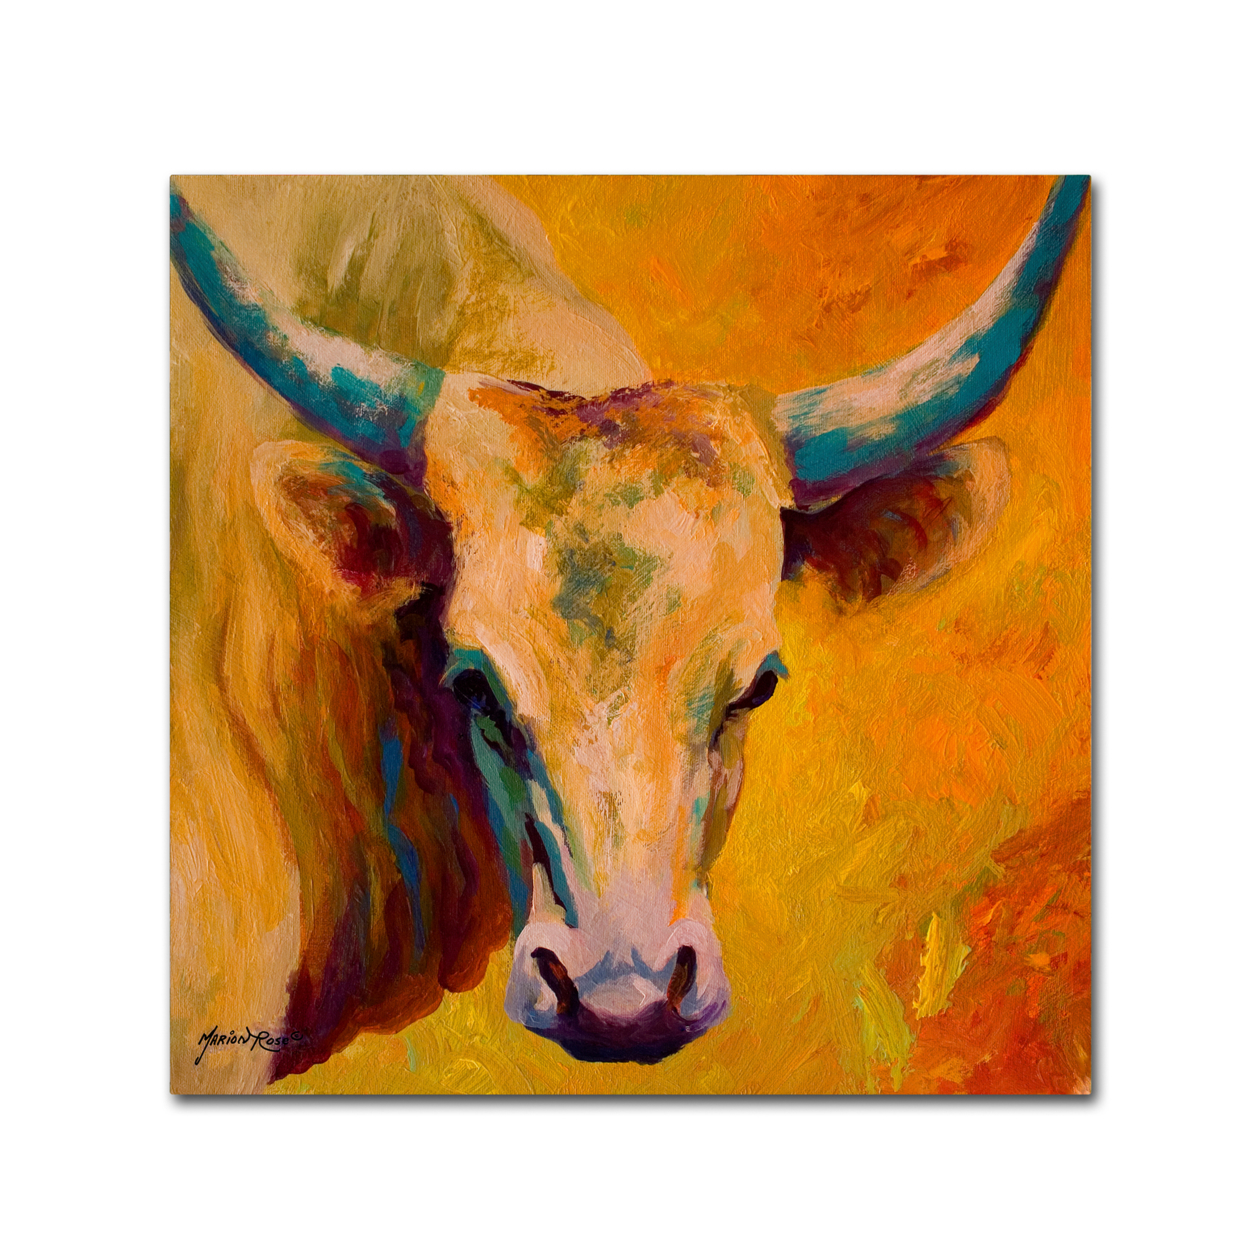 Marion Rose 'Creamy Texan' Ready To Hang Canvas Art 18 X 18 Inches Made In USA